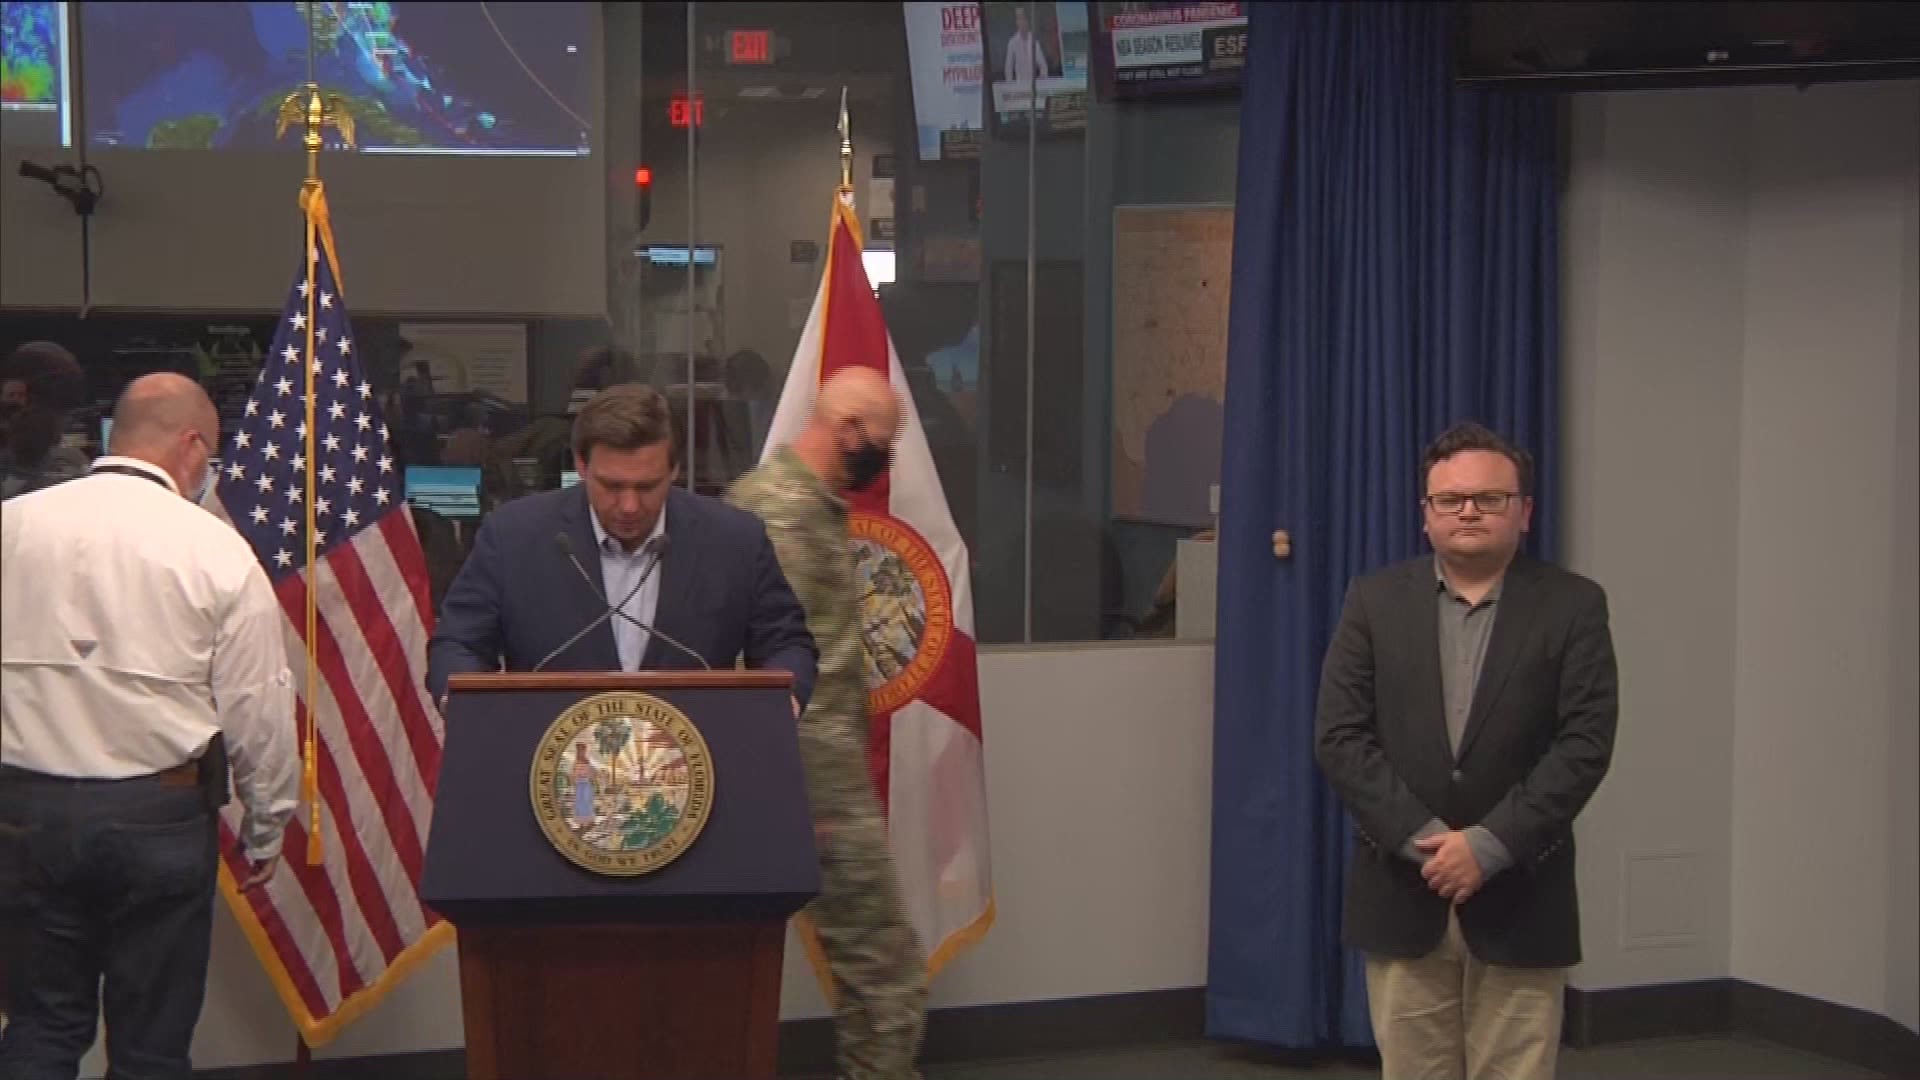 The governor spoke Saturday at 5 p.m. at the State Emergency Operations Center regarding Tropical Storm Isaias.